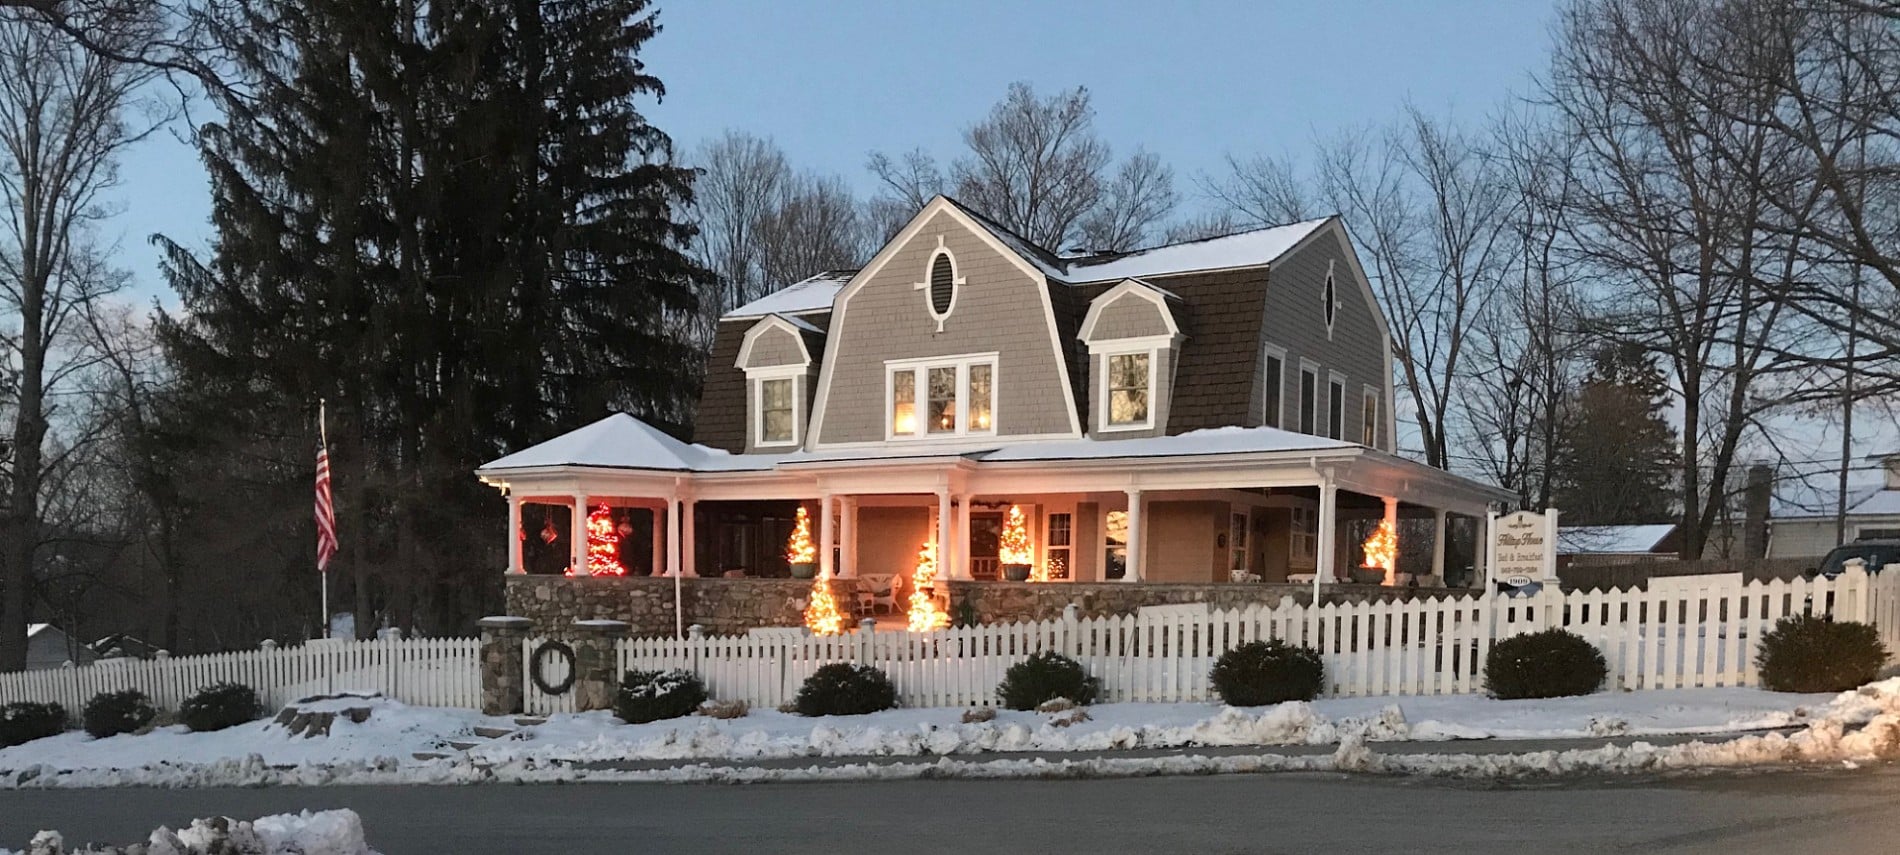 Front view in the winter of a large home with stone wrap around porch with Christmas tress, white pillars, and many windows